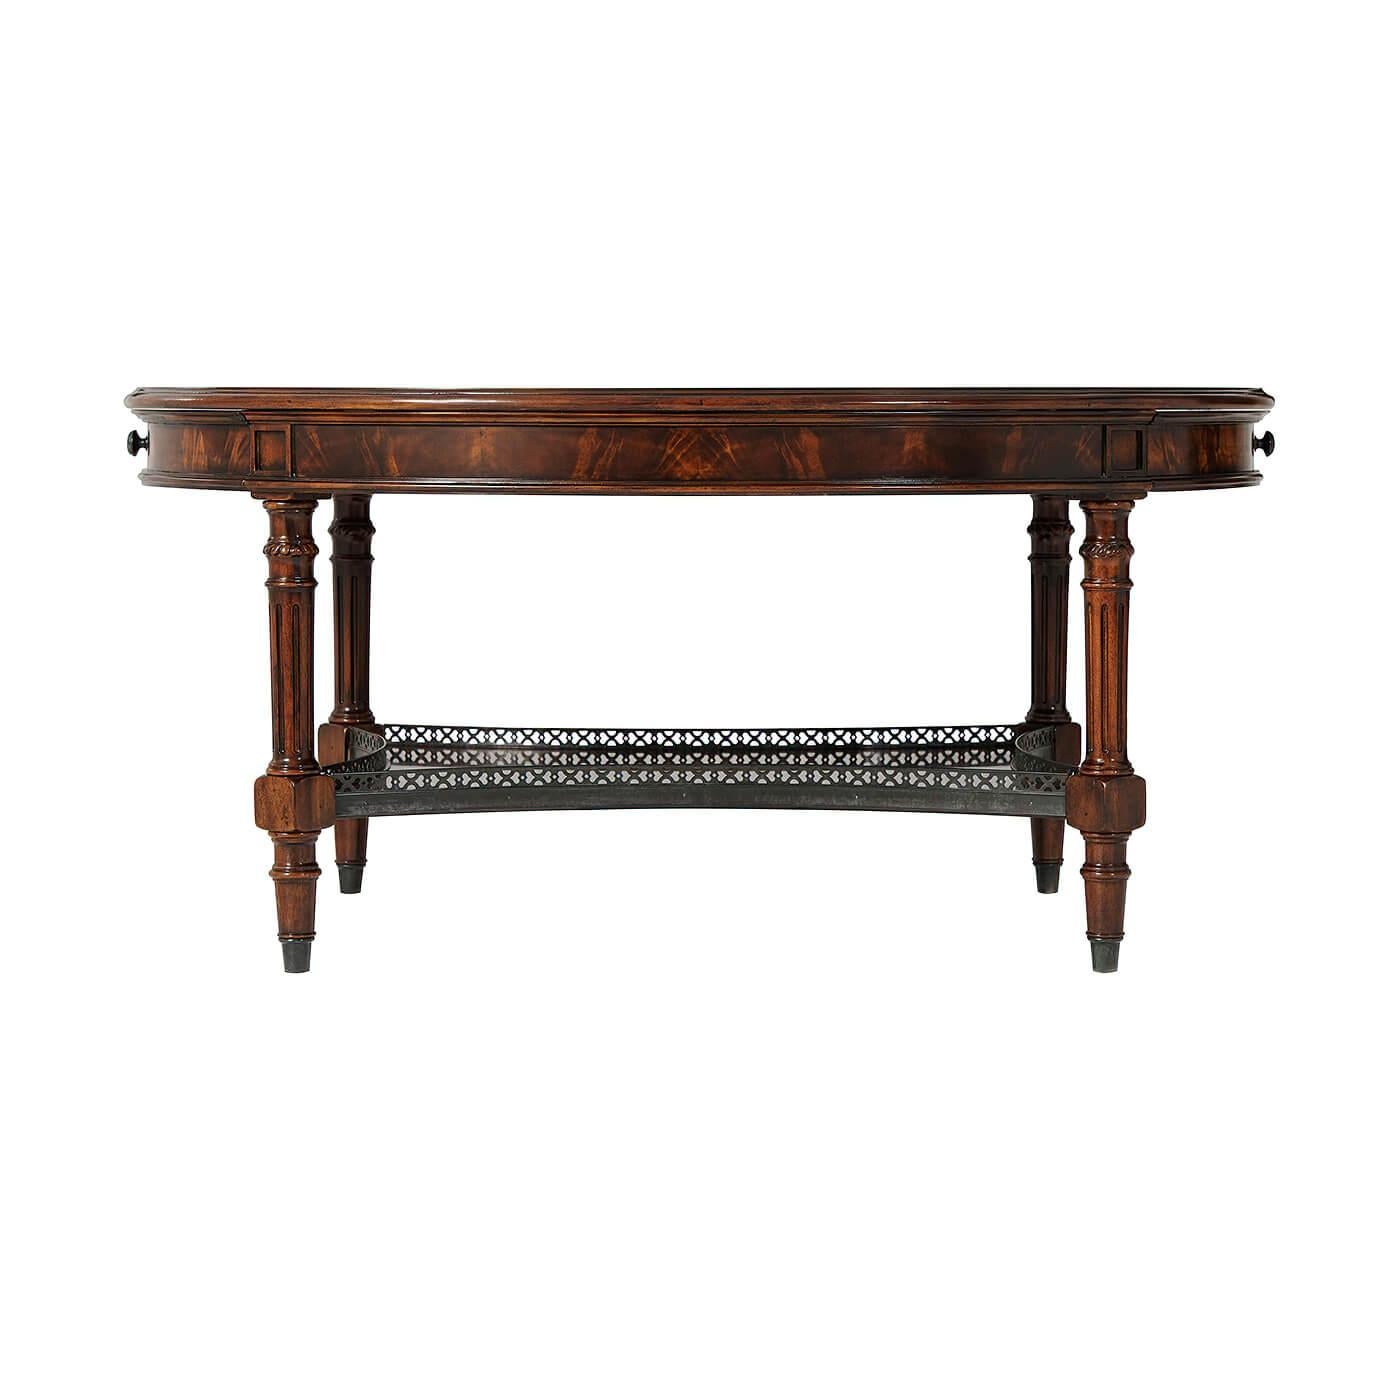 A Neoclassic style oval mahogany and burl veneer inlaid cocktail table, the oval top with two opposing end drawers, verdigris brass handles and a gallery to the concave undertier, on turned and fluted legs.

Dimensions: 42